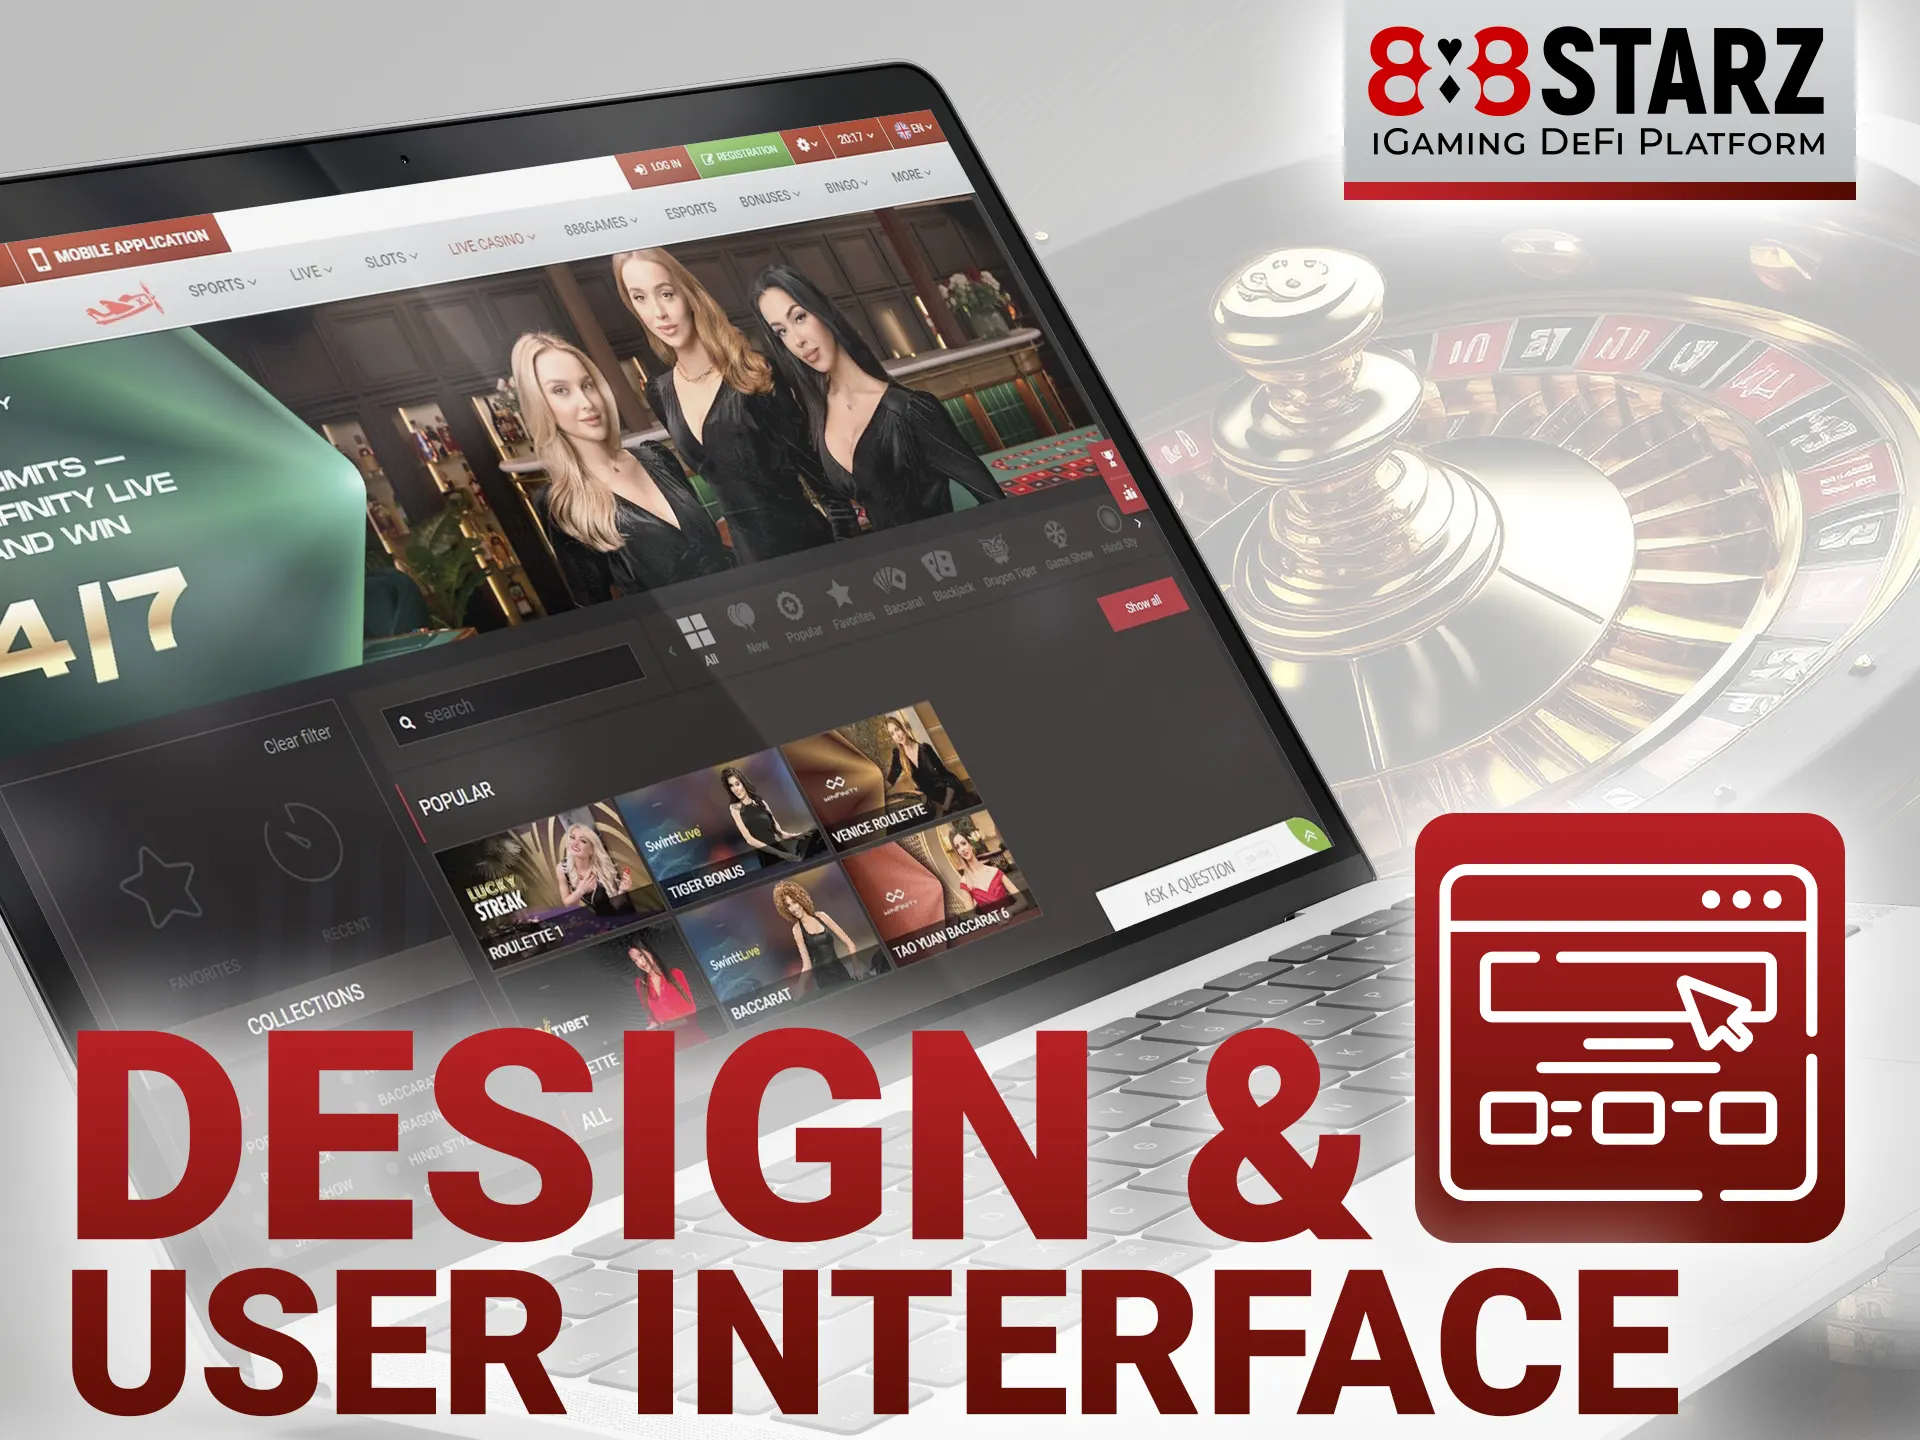 The modern design creates an exciting gaming experience for the 888starz user.